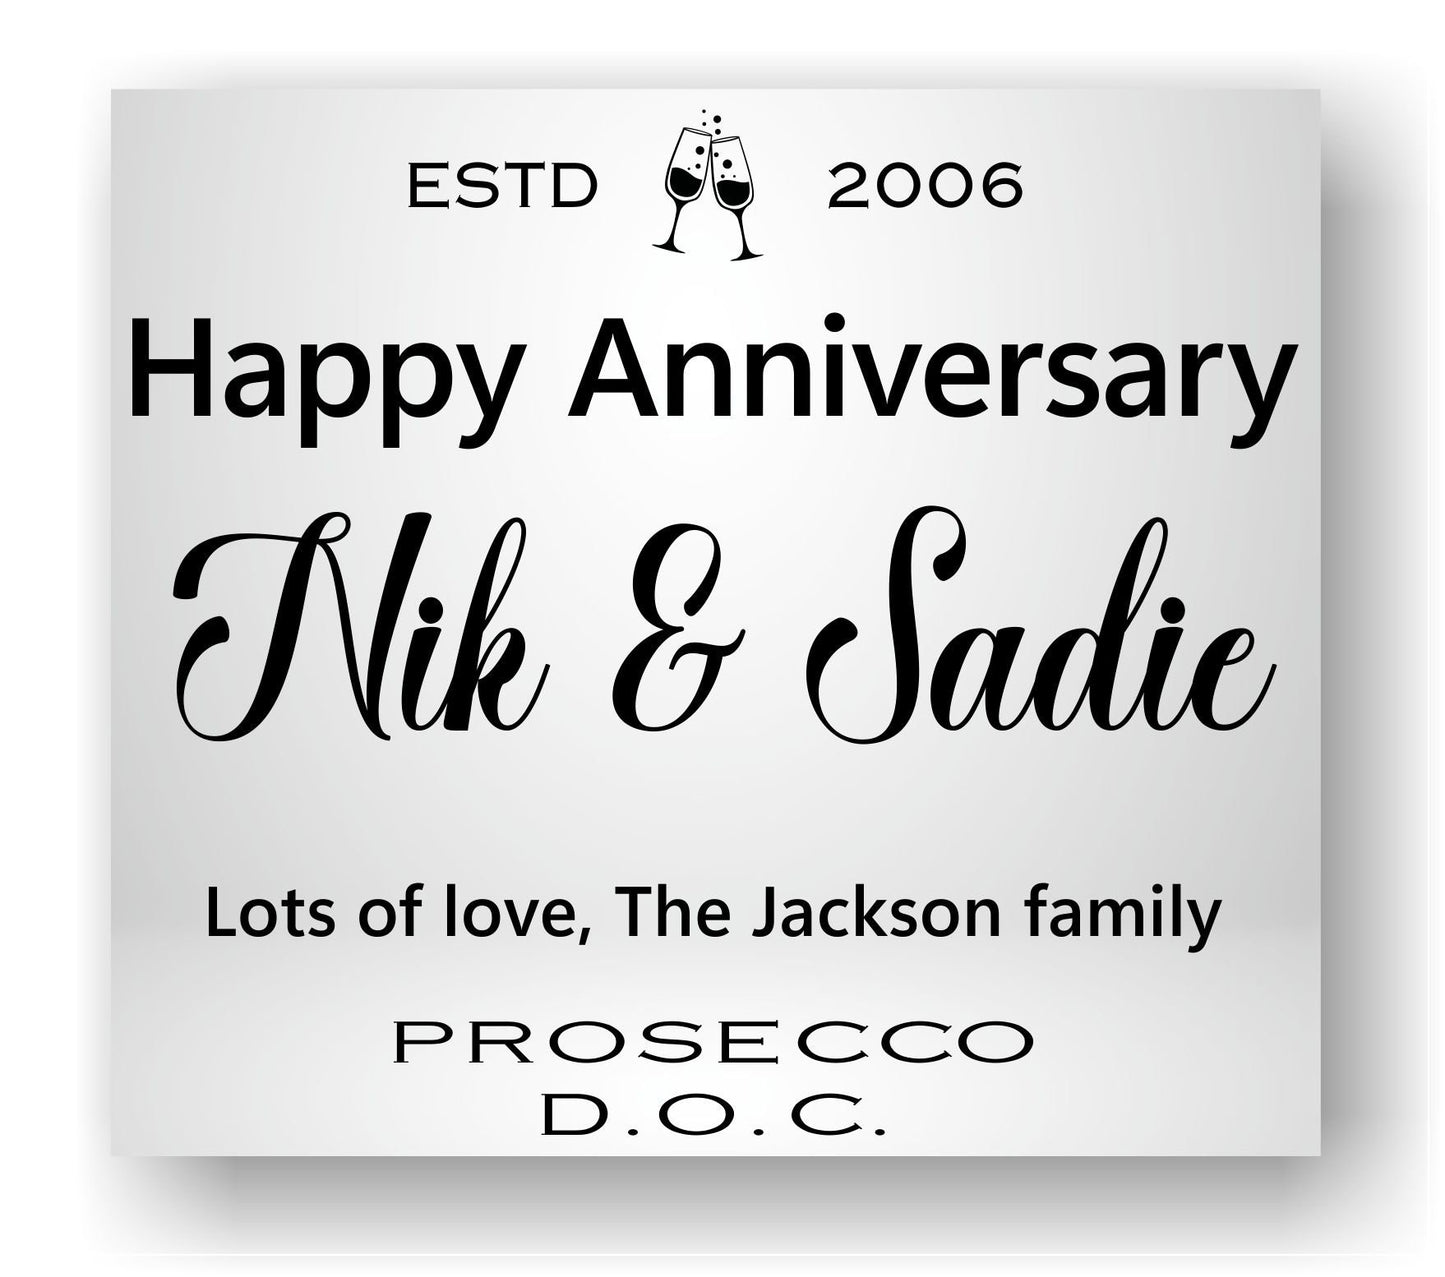 Happy Anniversary Bottle Labels  x2 - Pink or Grey - Any Name Year and Message - To fit Prosecco Wine Bottles